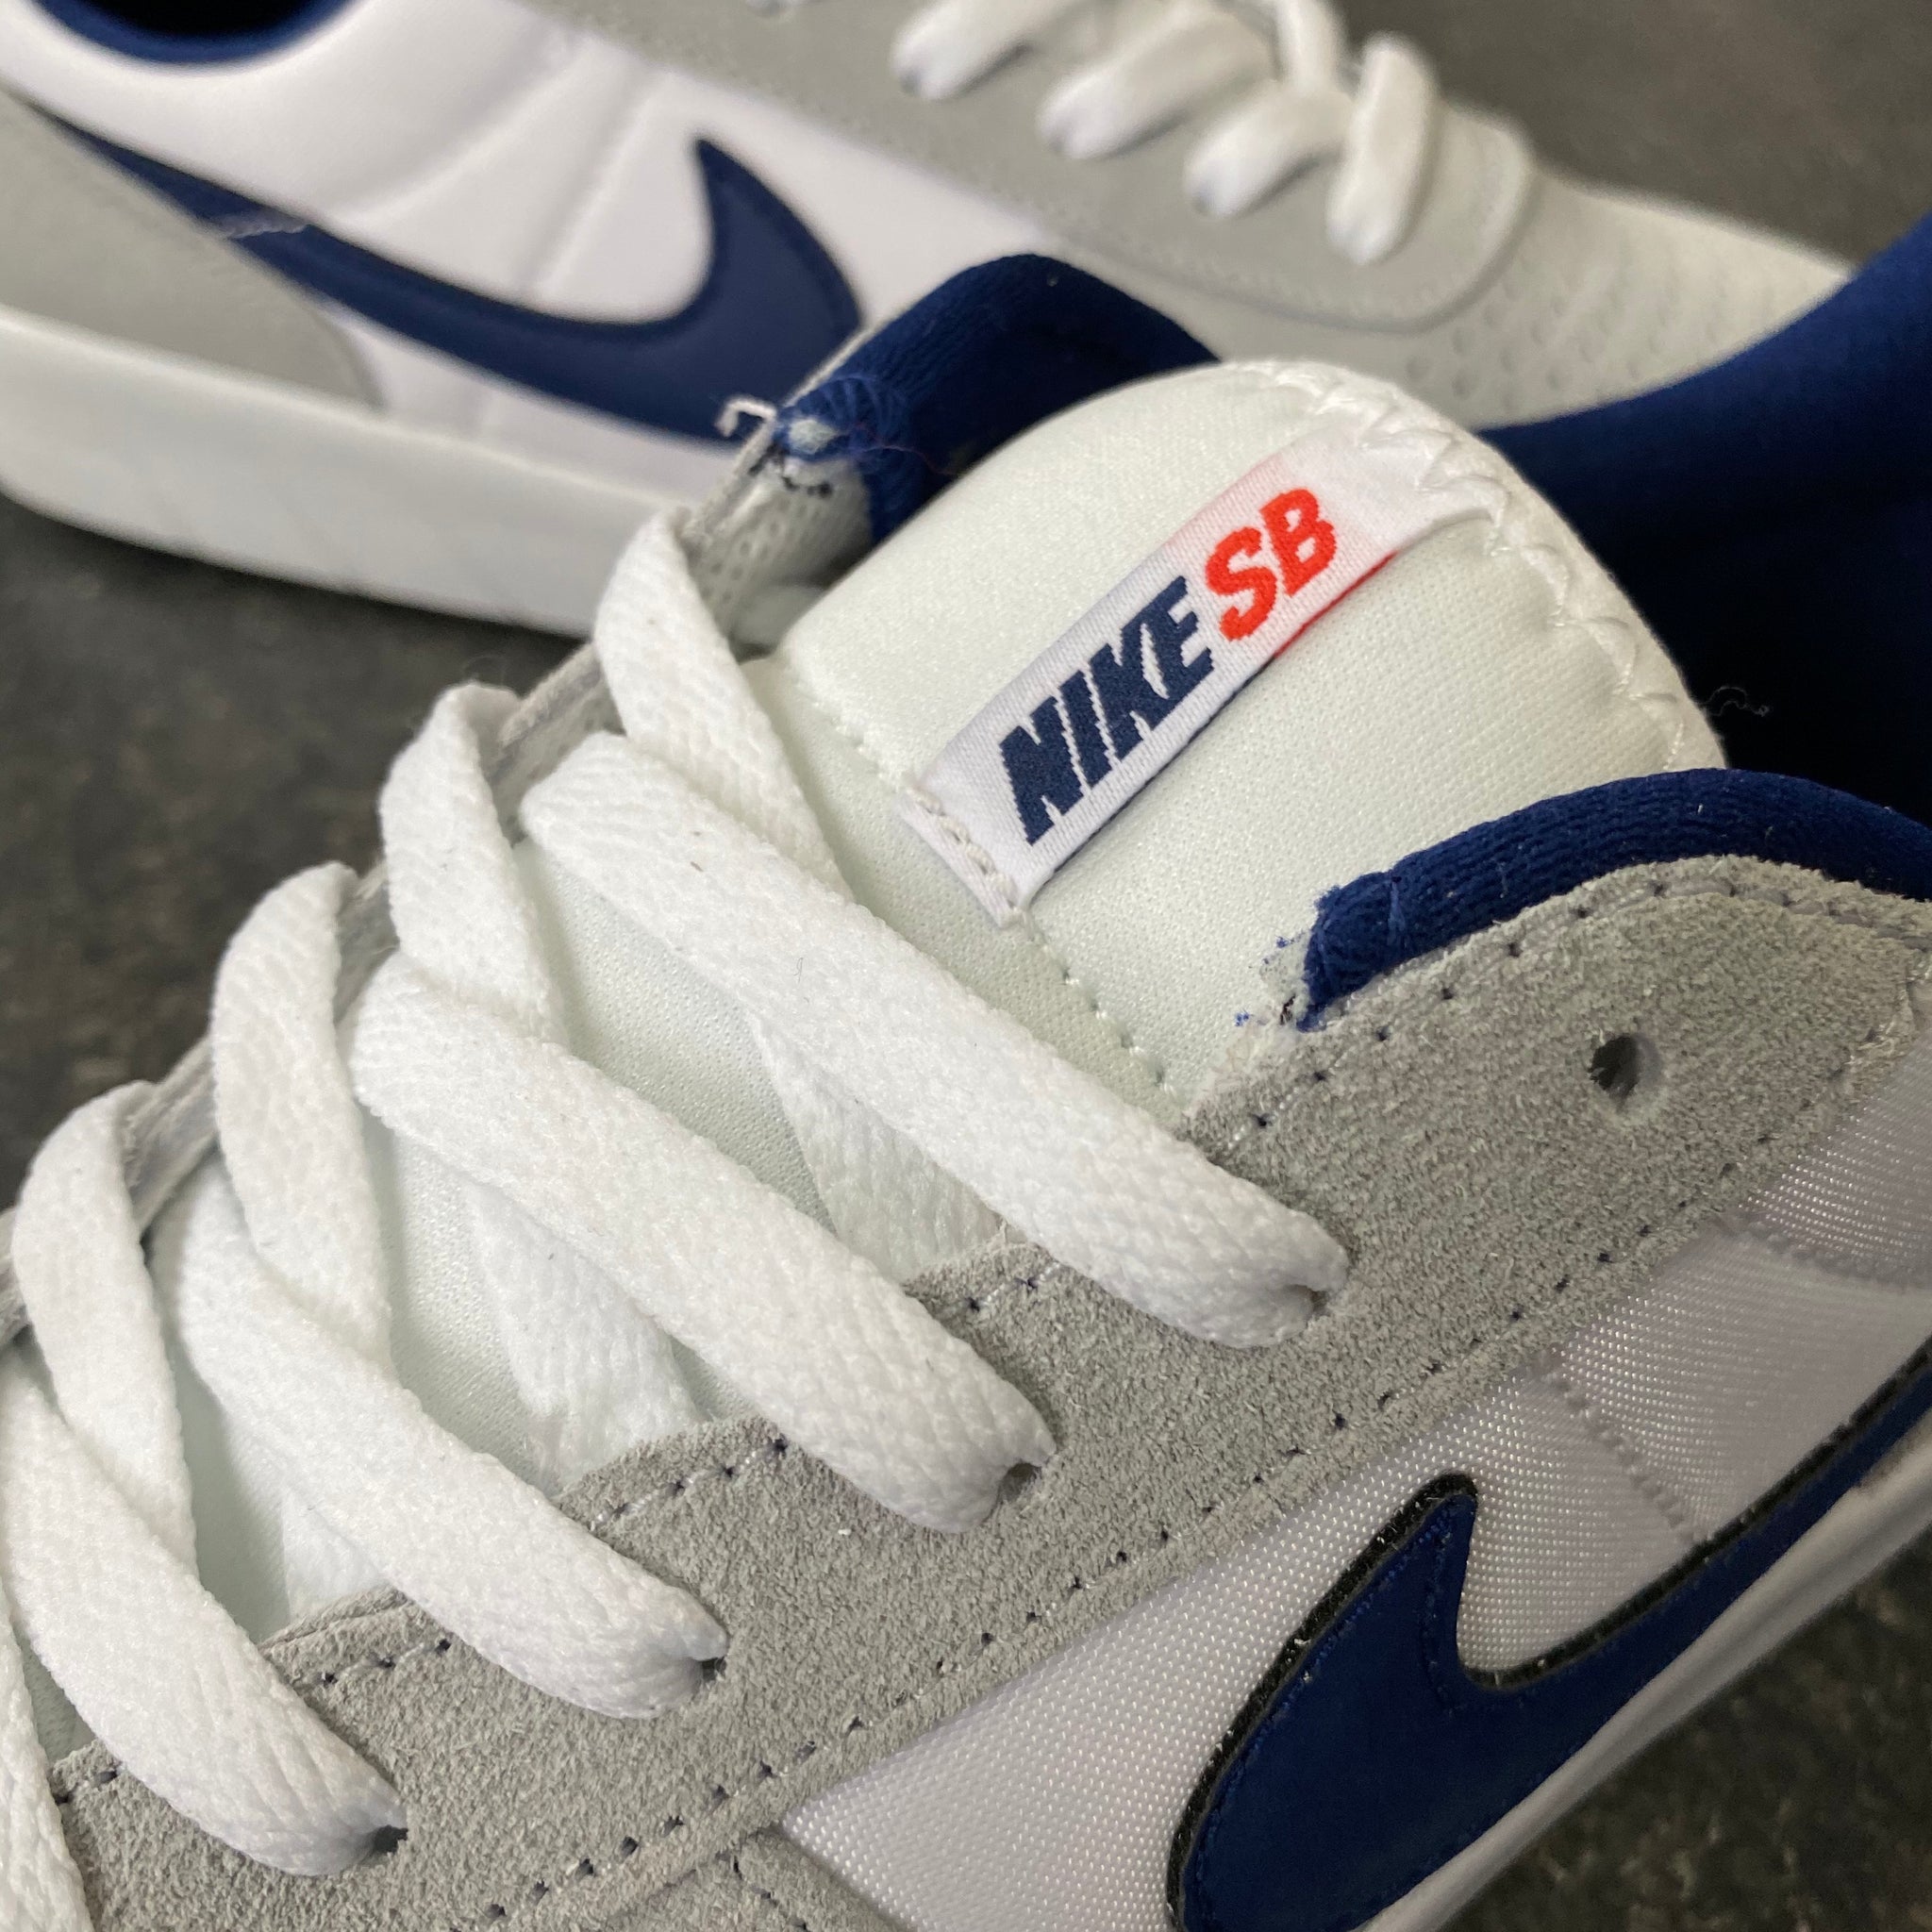 nike sb team classic shoes wolf grey blue void white